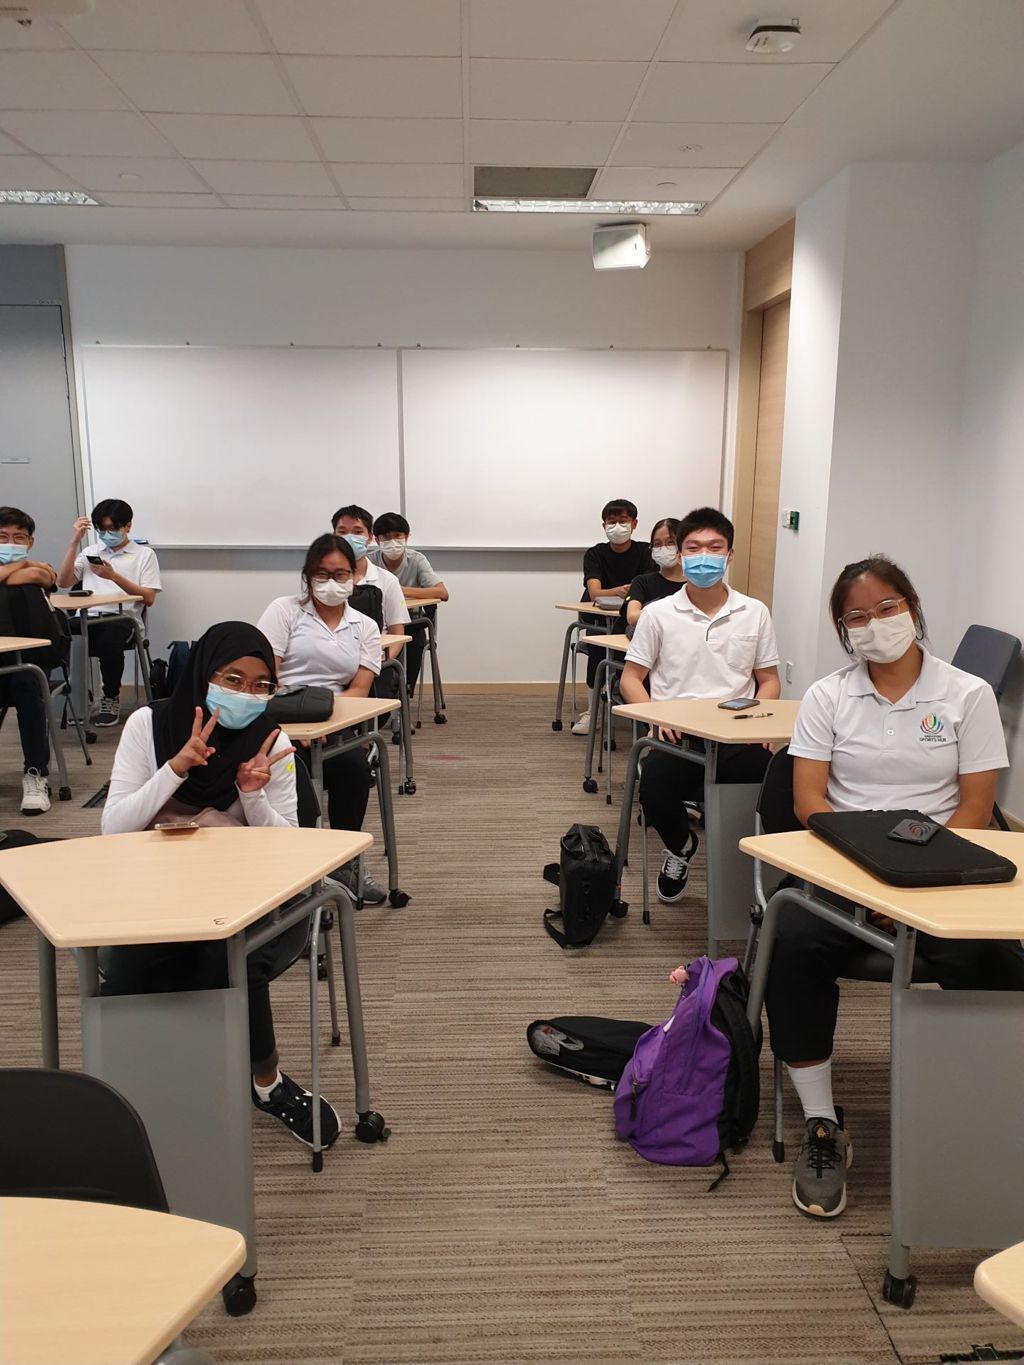 Applied Science students attending lessons during the COVID-19 pandemic